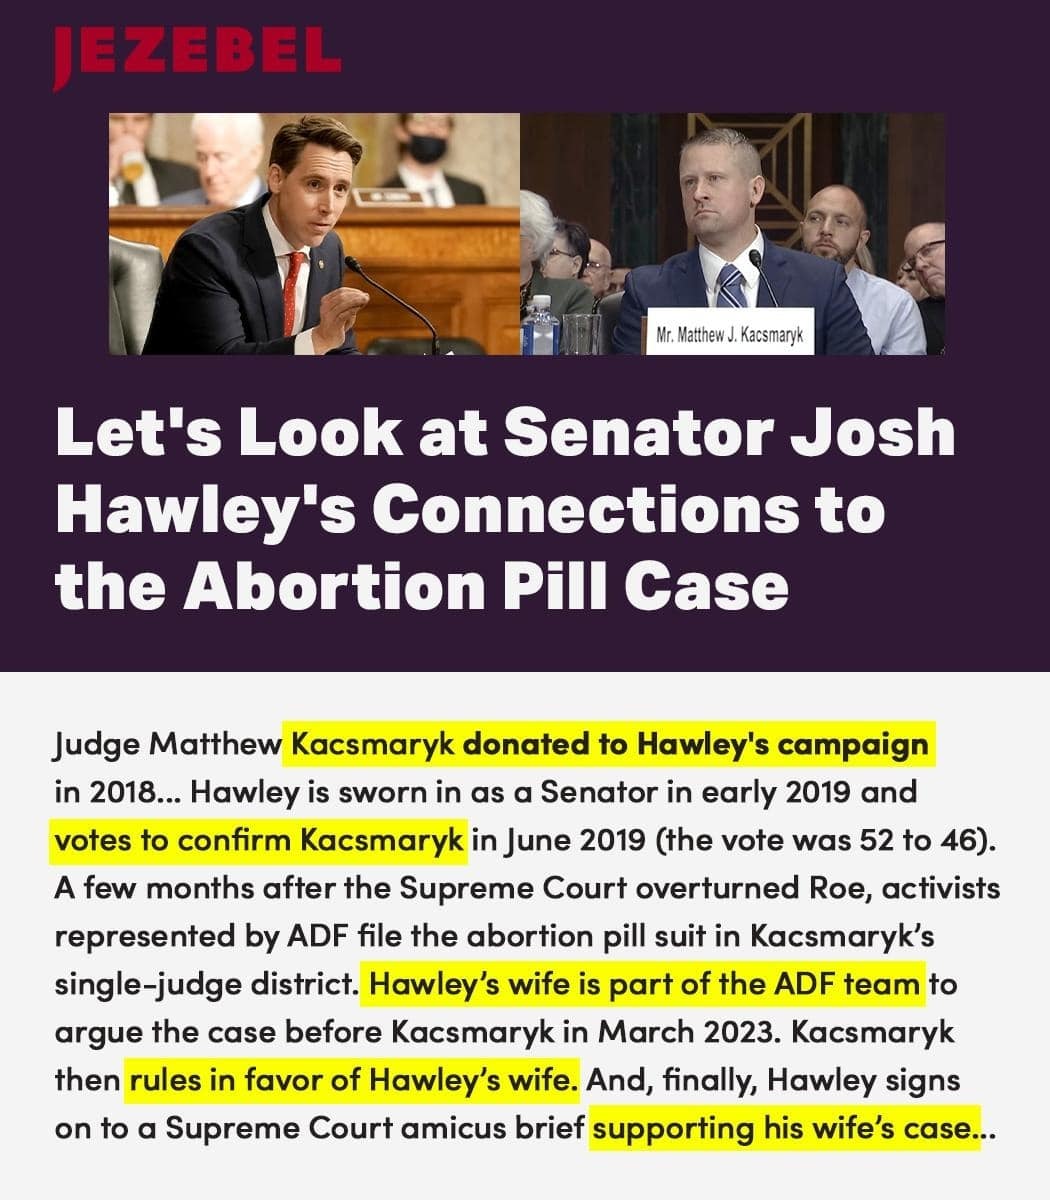 JEZEBEL: Let's Look at Senator Josh Hawley's Connections to the Abortion Pill Case. Excerpt: Judge Matthew Kacsmaryk donated to Hawley's campaign in 2018... Hawley is sworn in as senator in early 2019 and votes to confirm Kacsmaryk in June 2019 (the vote was 52 to 46). A few months after the Supreme Court overturned Roe, activists represented by ADF file the abortion pill suit in Kacsmaryk's single-judge district. Hawley's wife is part of the ADF team to argue the case before Kacsmaryk in March 2023. Kacsmaryk then rules in favor of Hawley's wife. And, finally, Hawley signs on to a Supreme Court amicus brief supporting his wife's case...